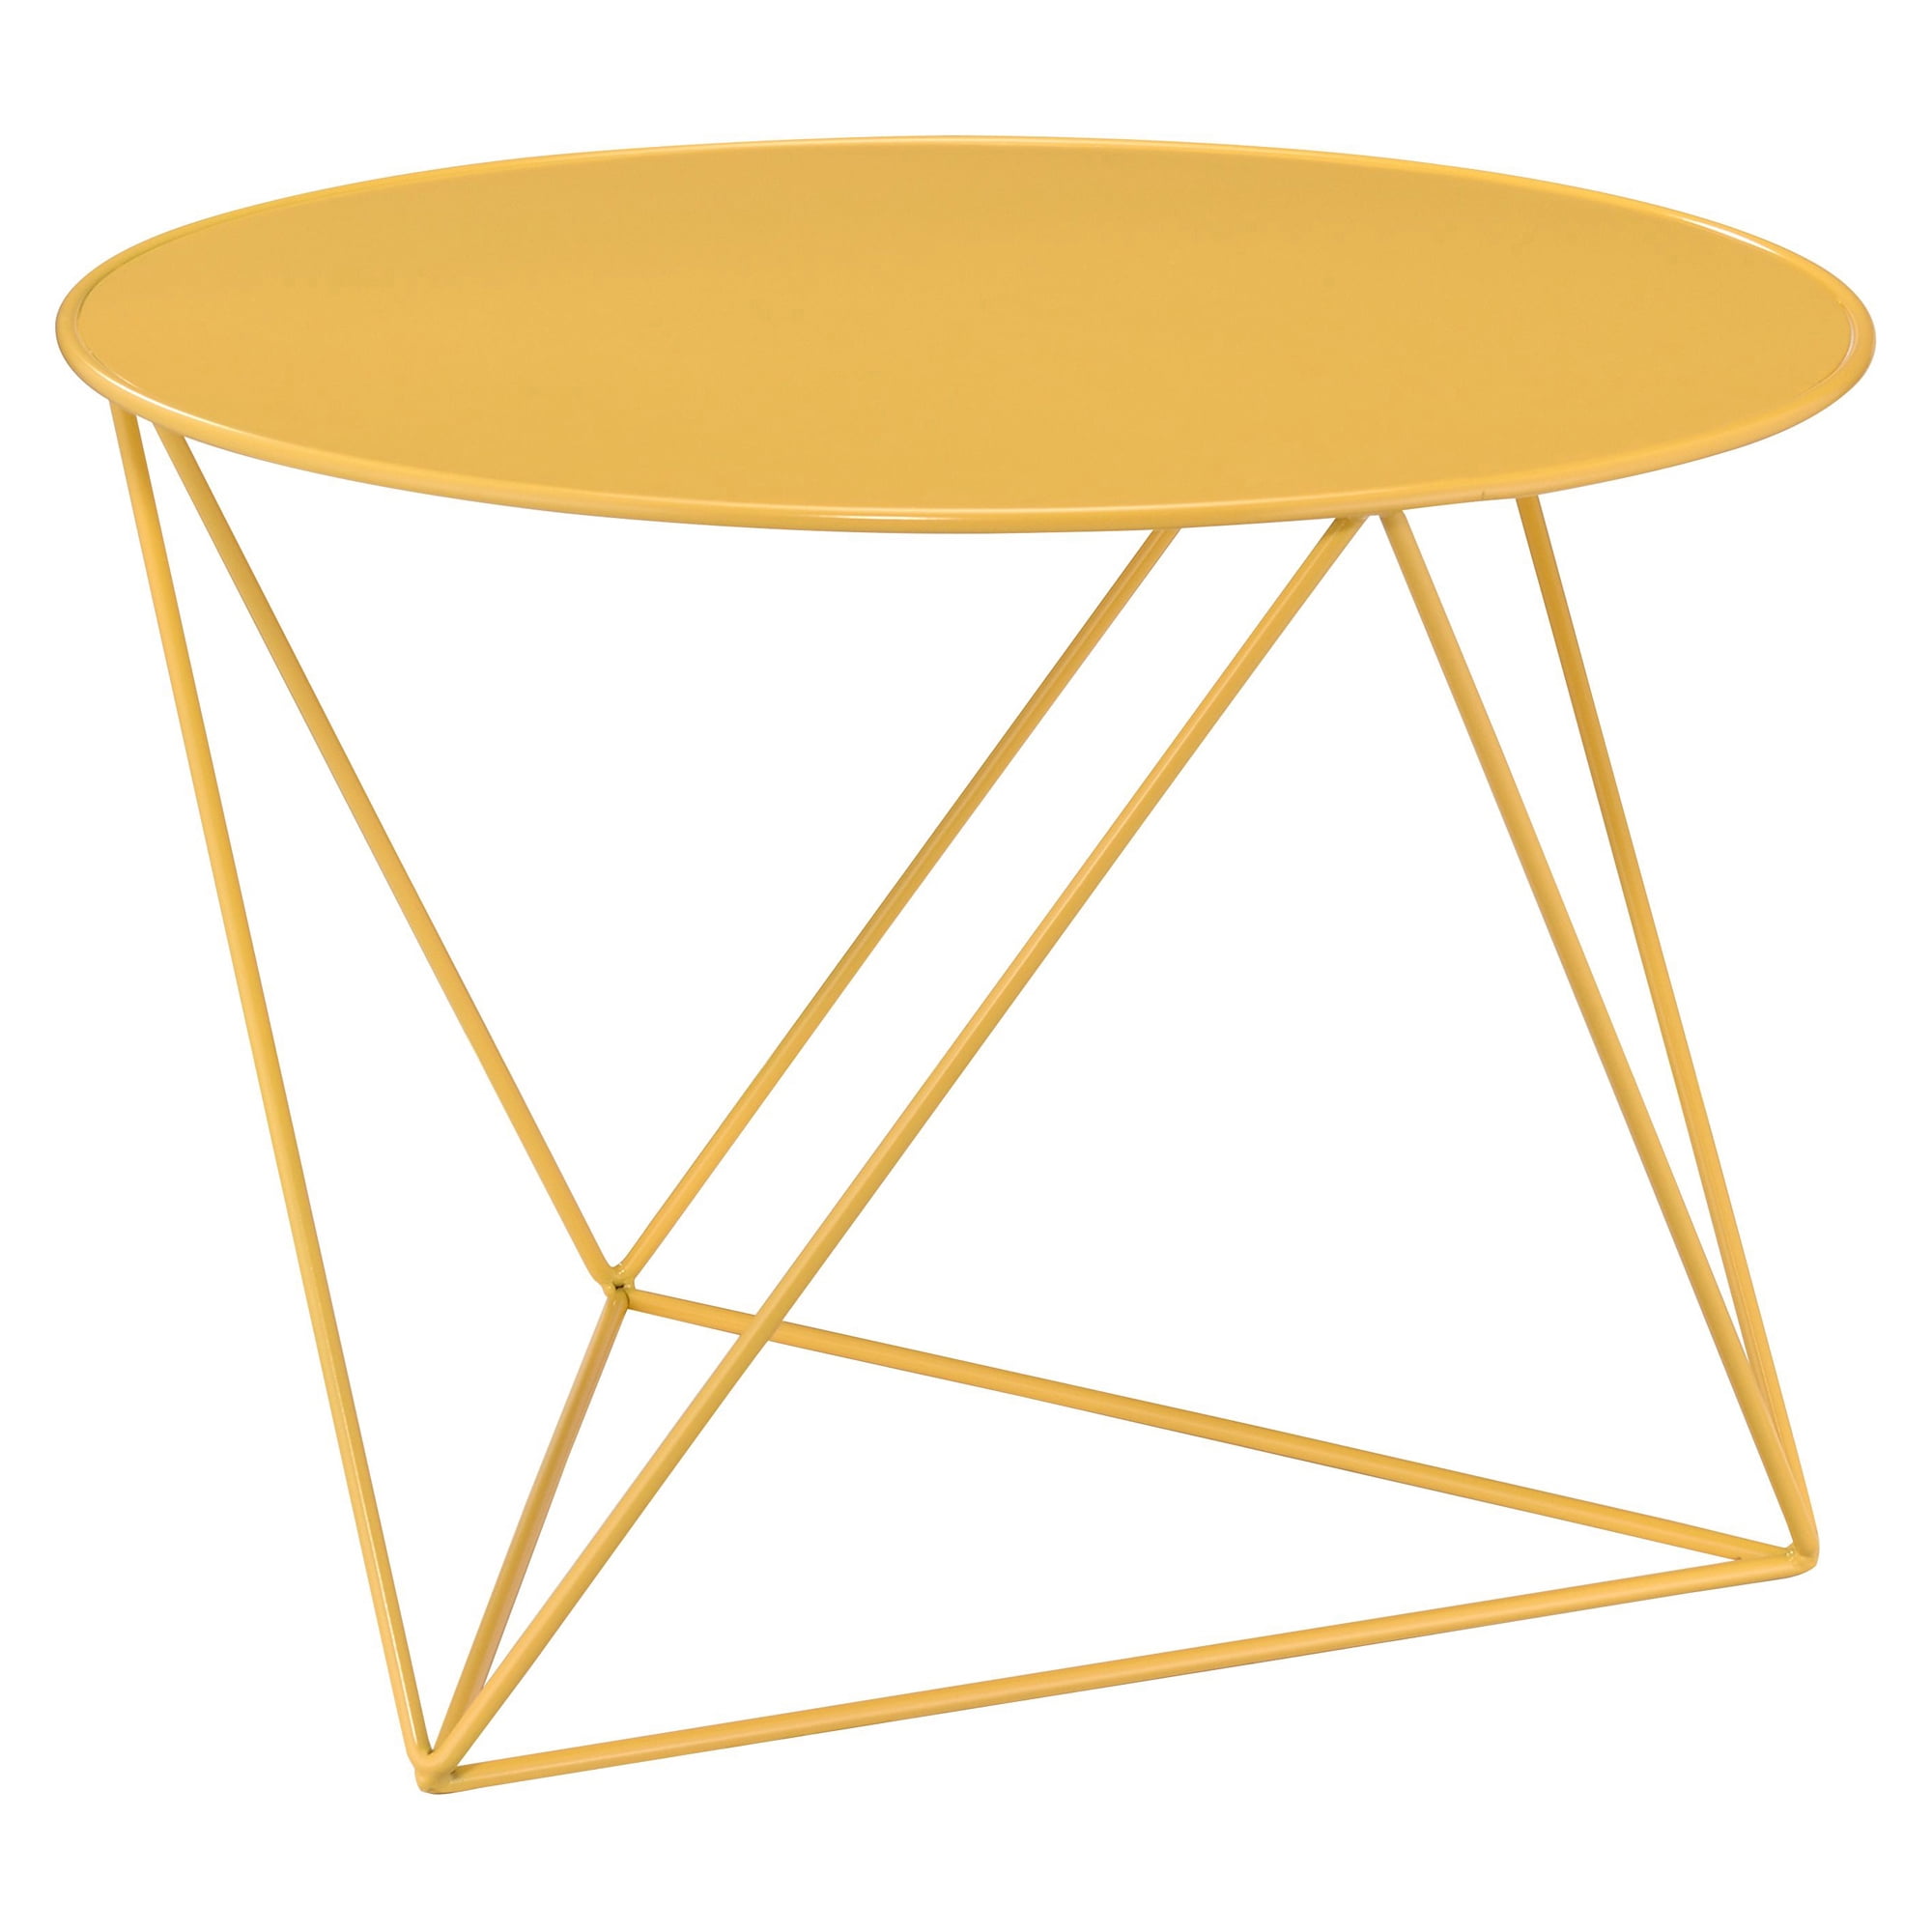 Picture of Acme Furniture 97841 17 x 23 x 23 in. Epidia Round Accent Table, Yellow